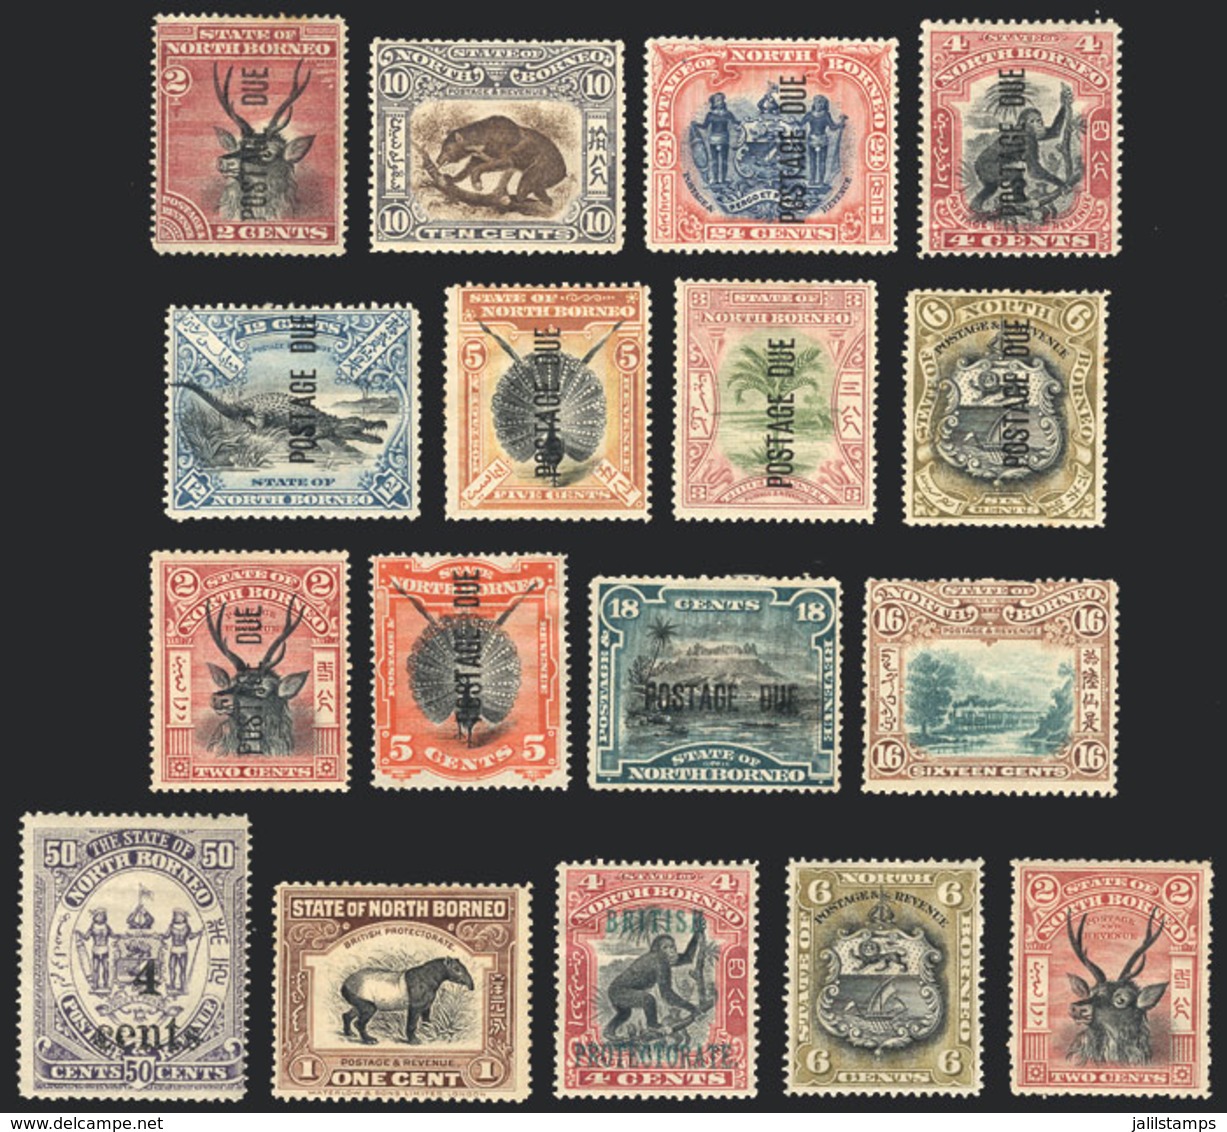 NORTH BORNEO: Lot Of Old Stamps, All Mint WITH ORIGINAL GUM, A Few With Minor Staining, Fine General Quality, Scott Cata - North Borneo (...-1963)